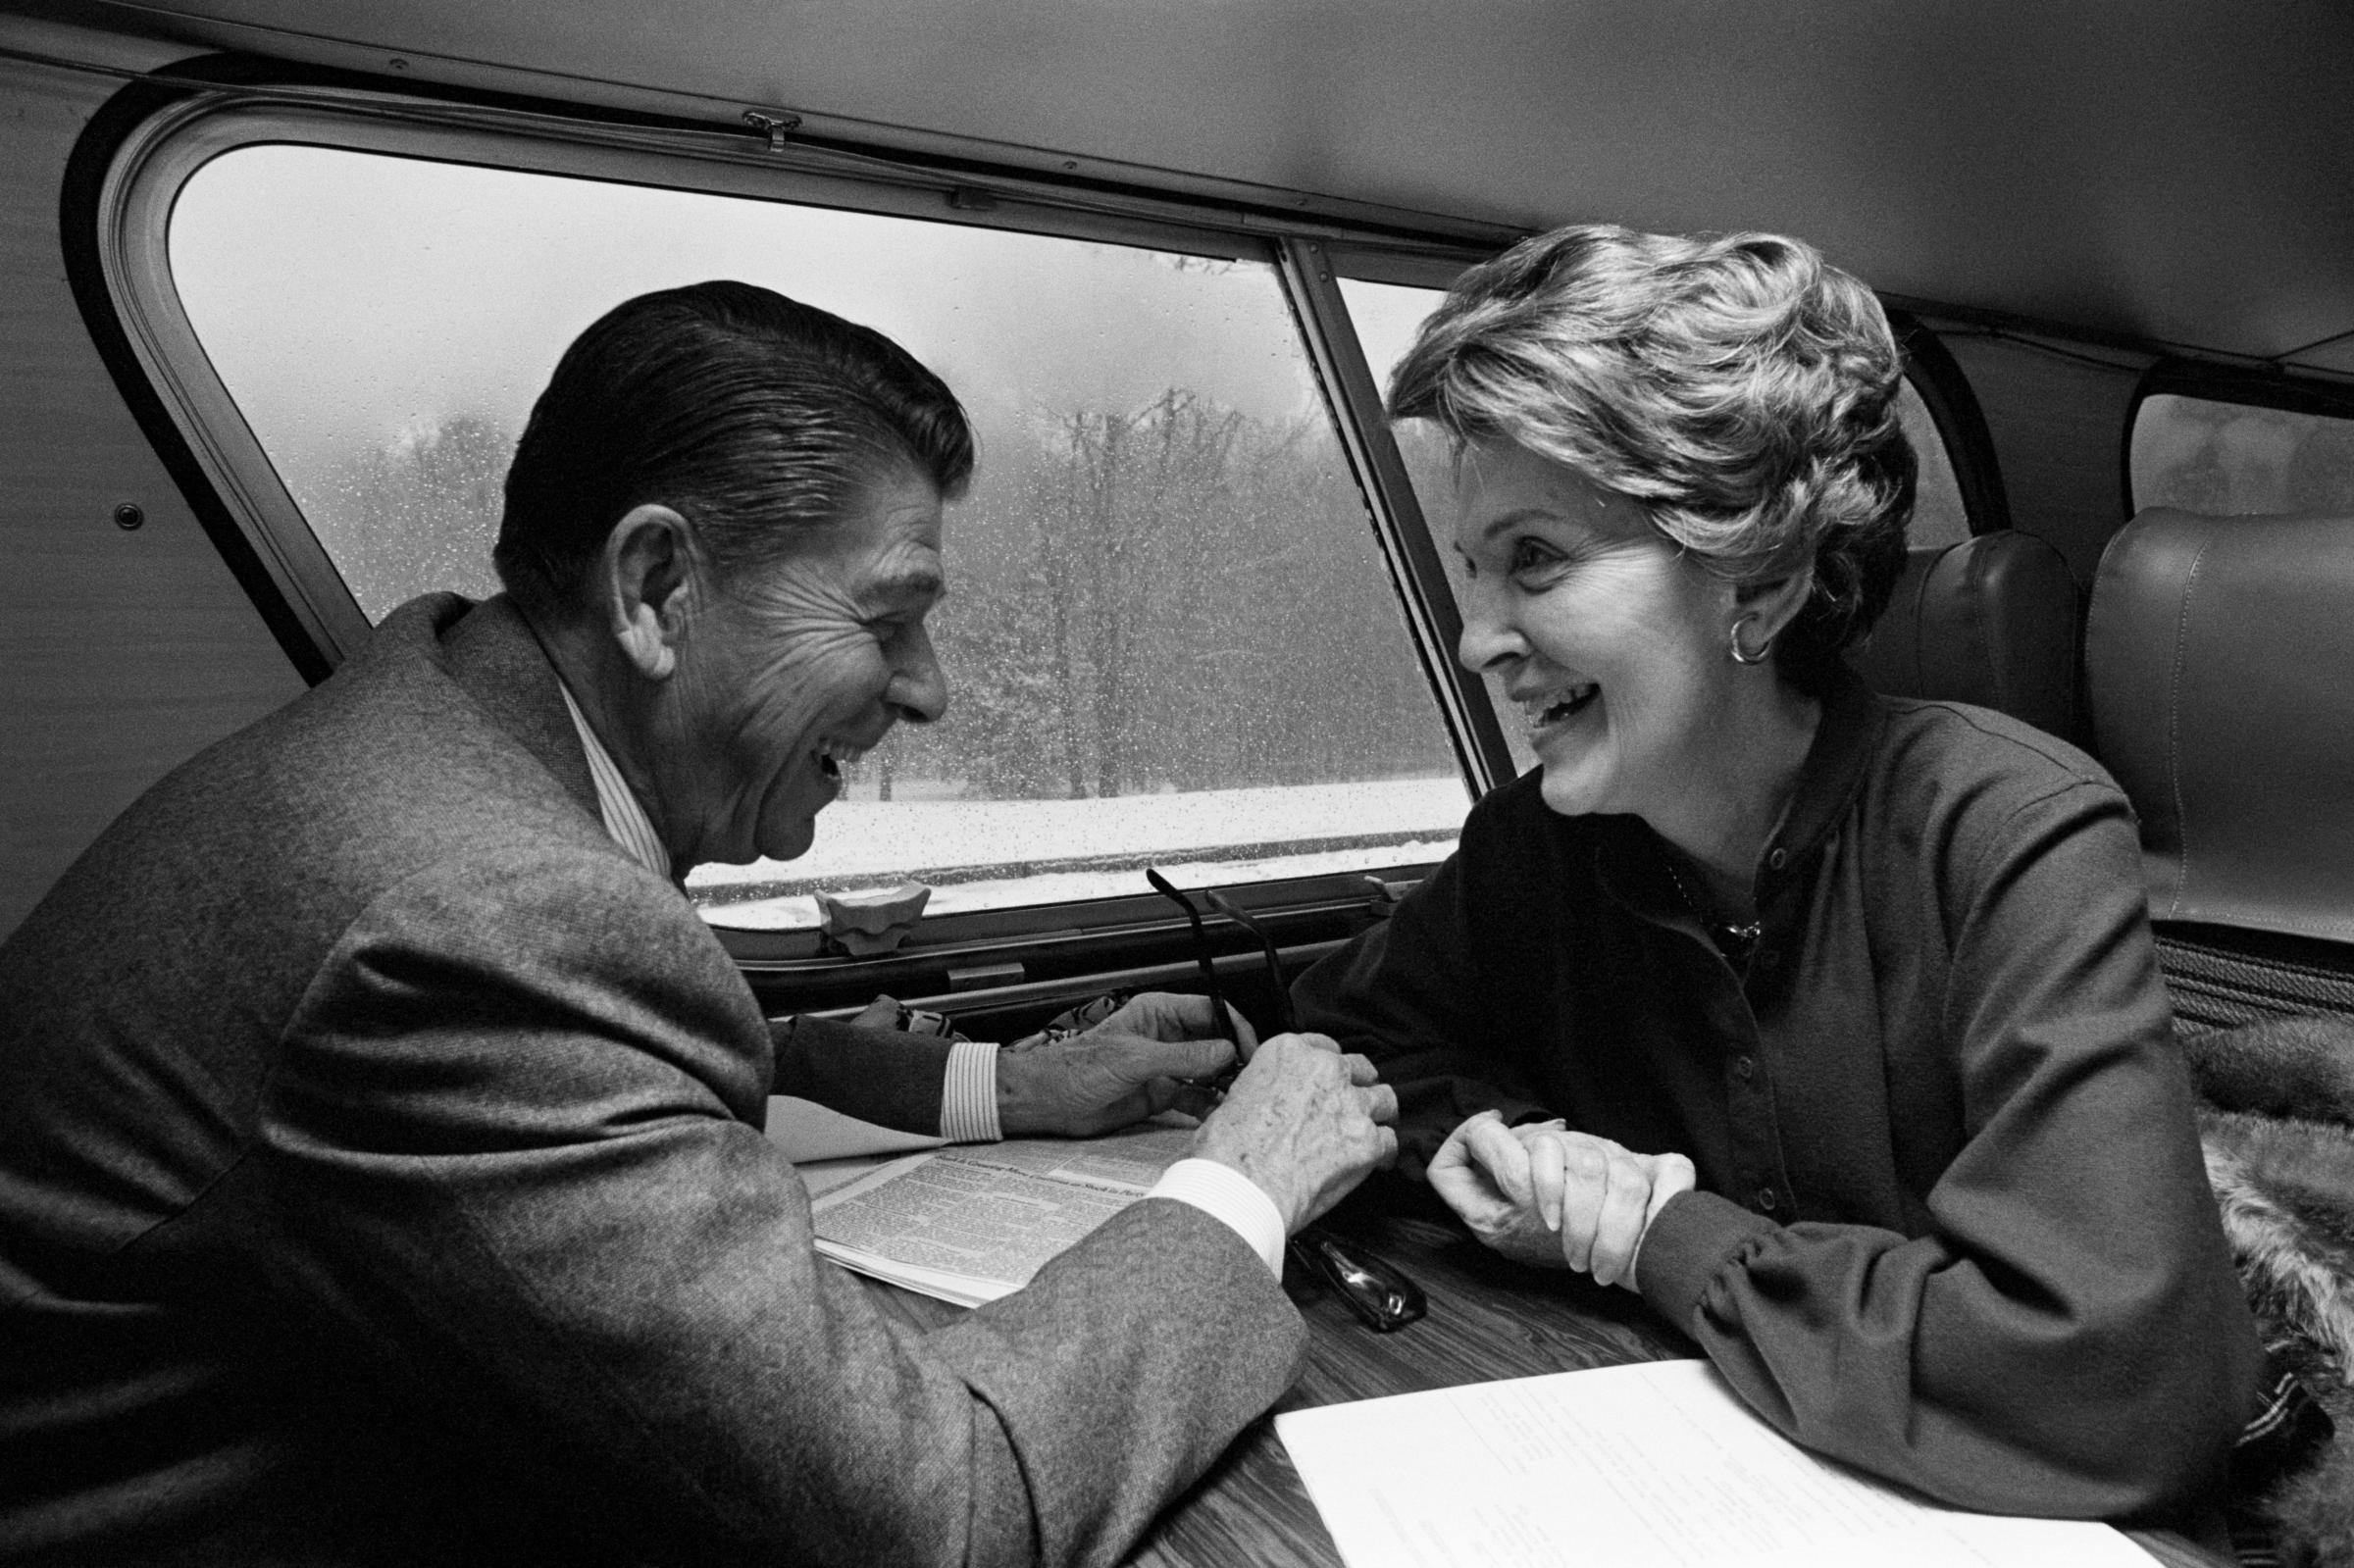 Then-Republican presidential candidate Ronald Reagan campaigns in New Hampshire with his wife Nancy on Feb. 16, 1980.